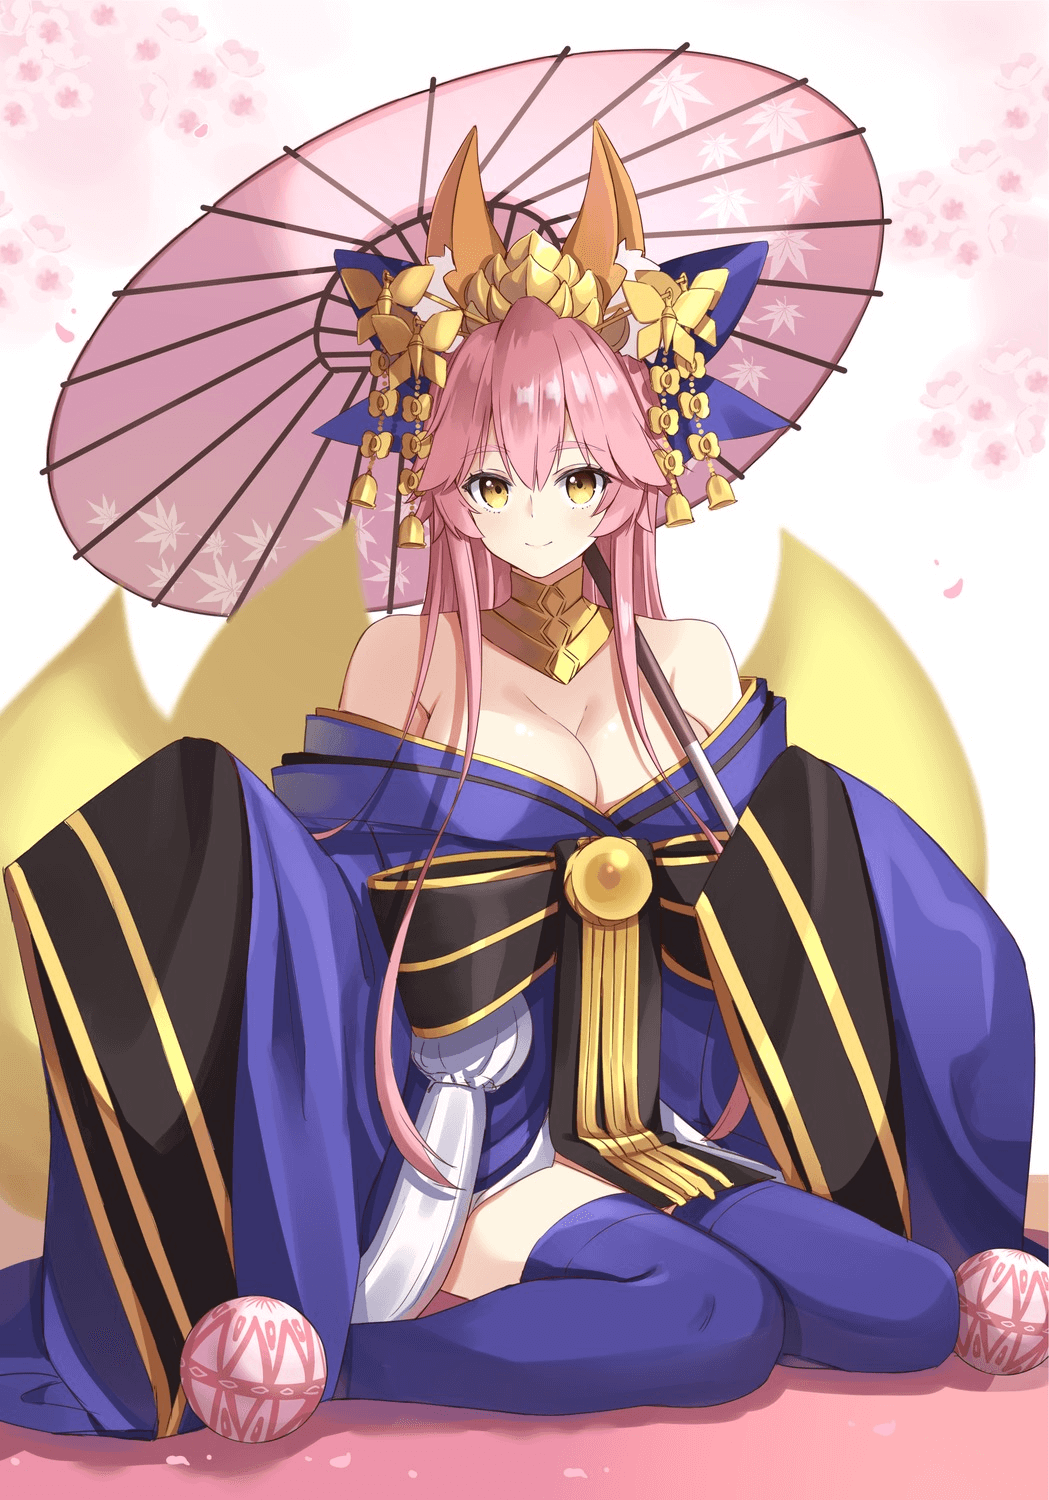 Tamamo for those who don't know fate